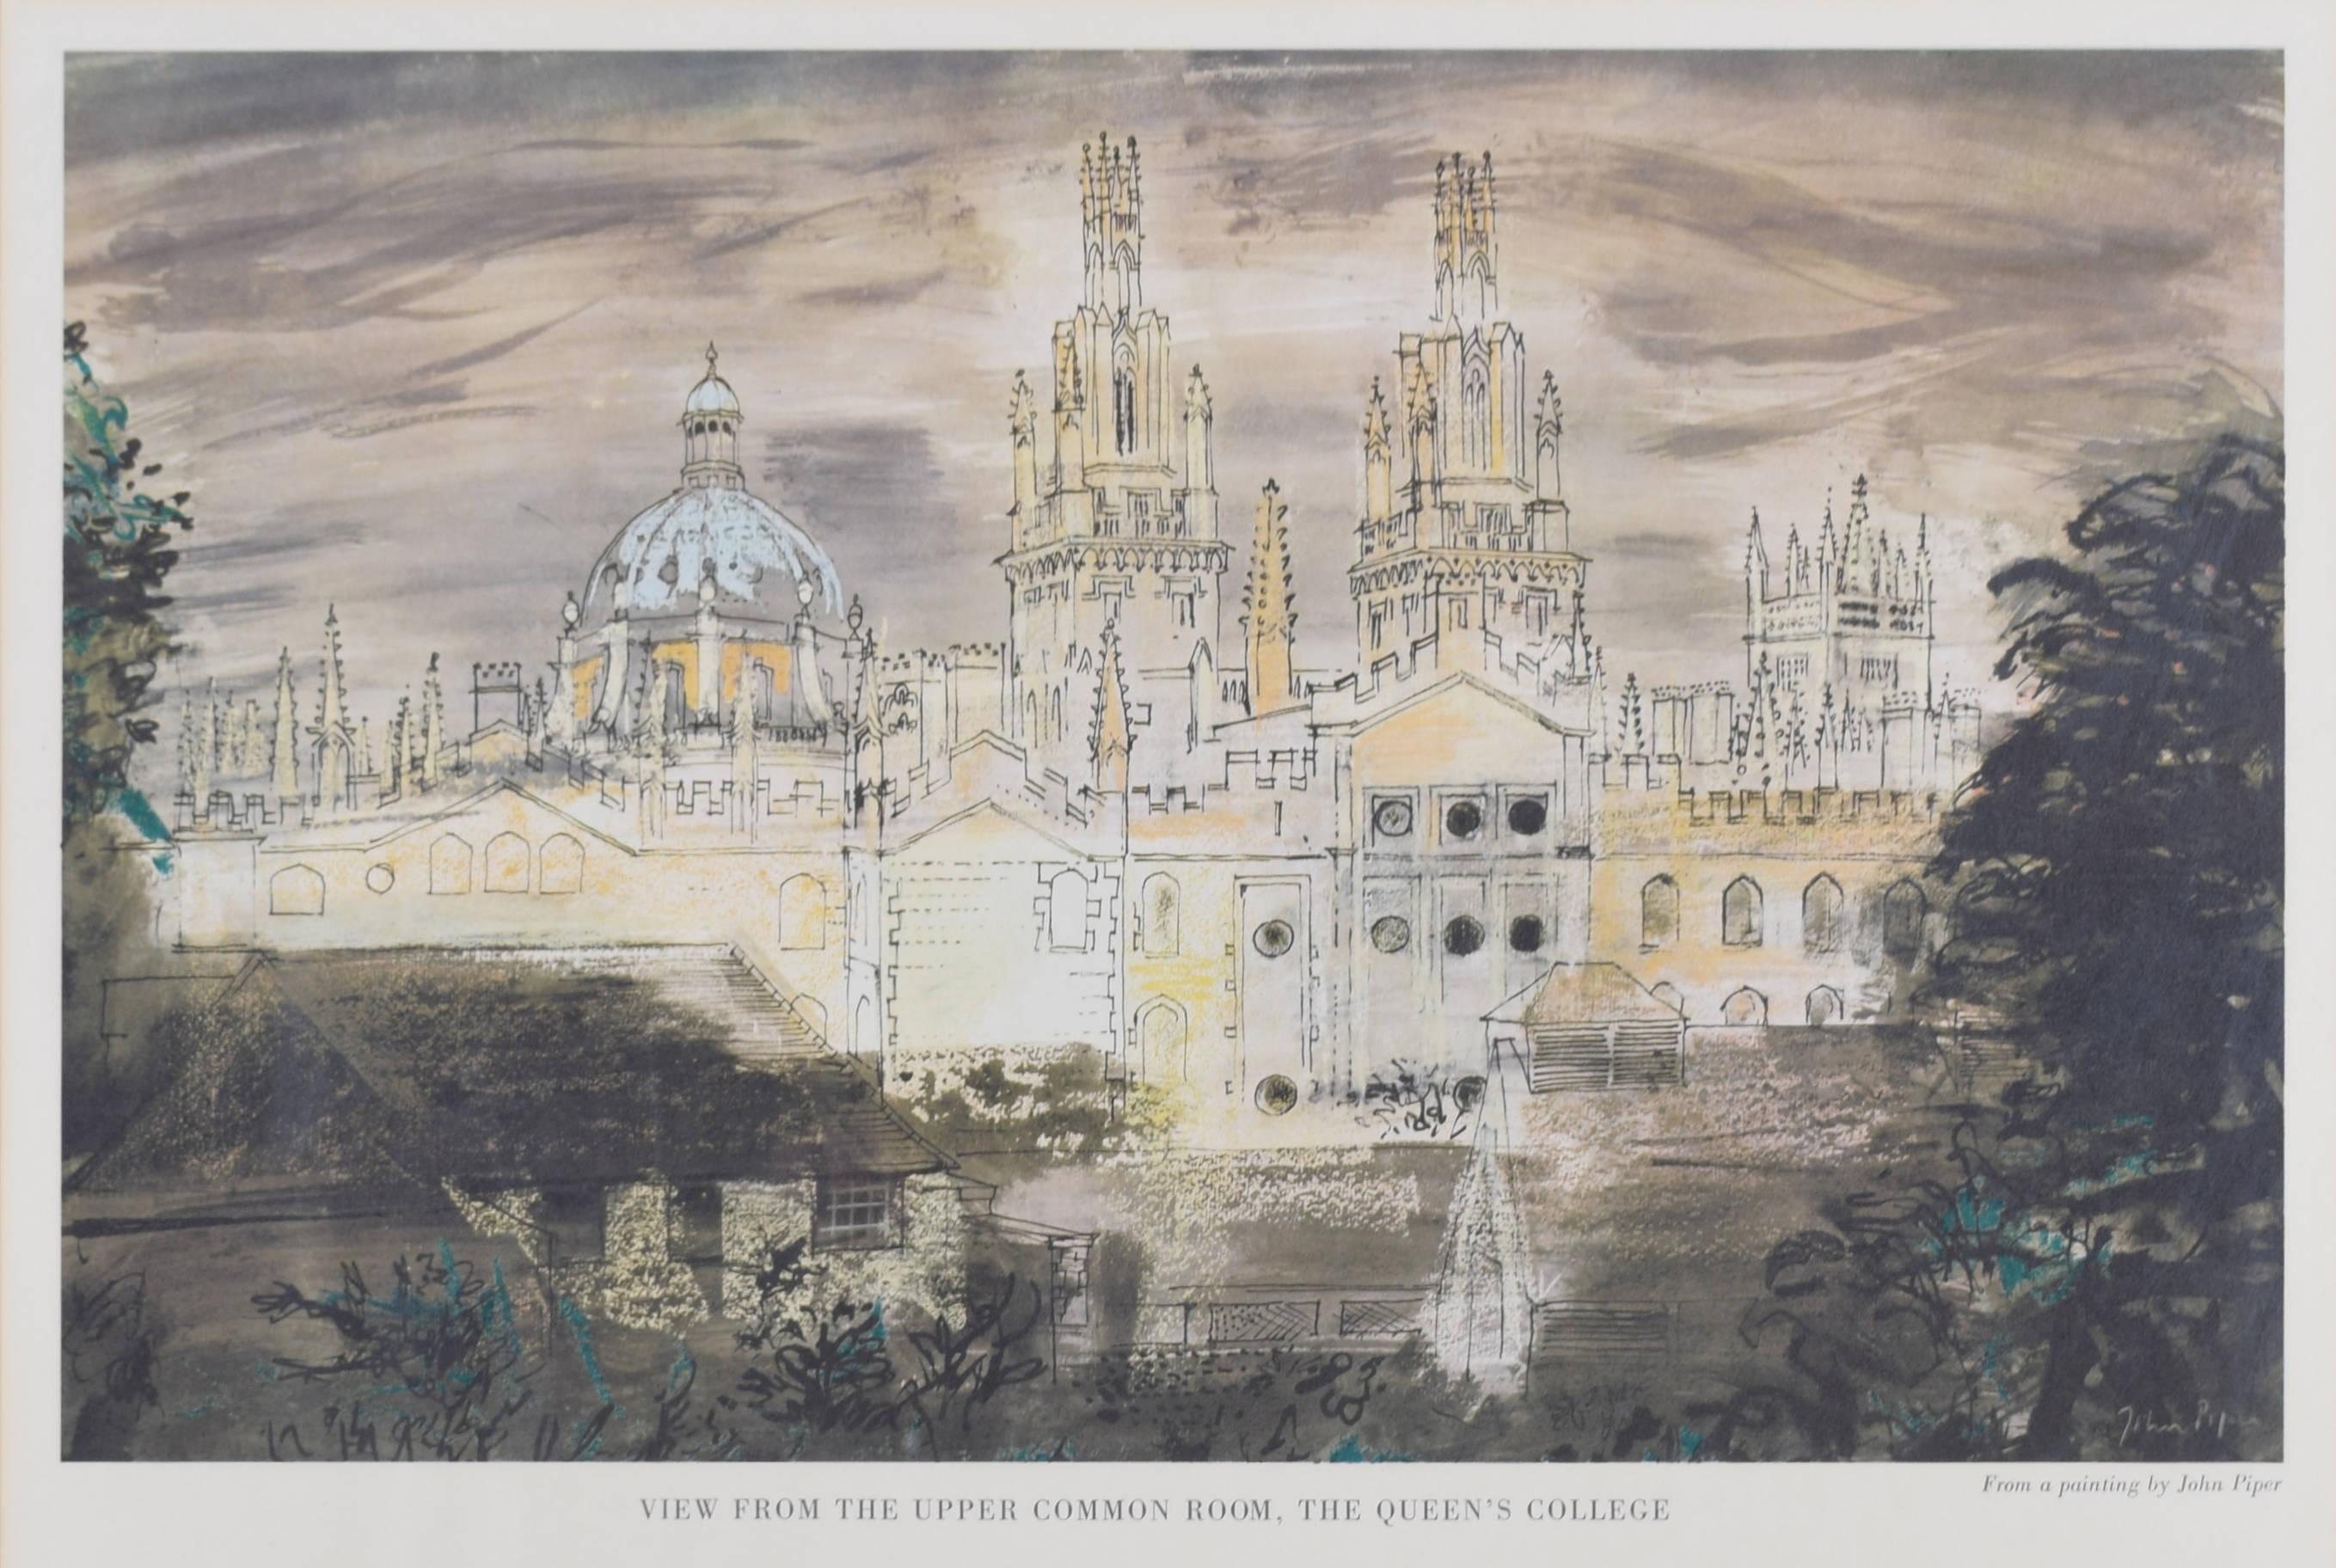 View from Queen's College, Oxford Almanac 1972 lithograph after John Piper  - Print by John Piper CH